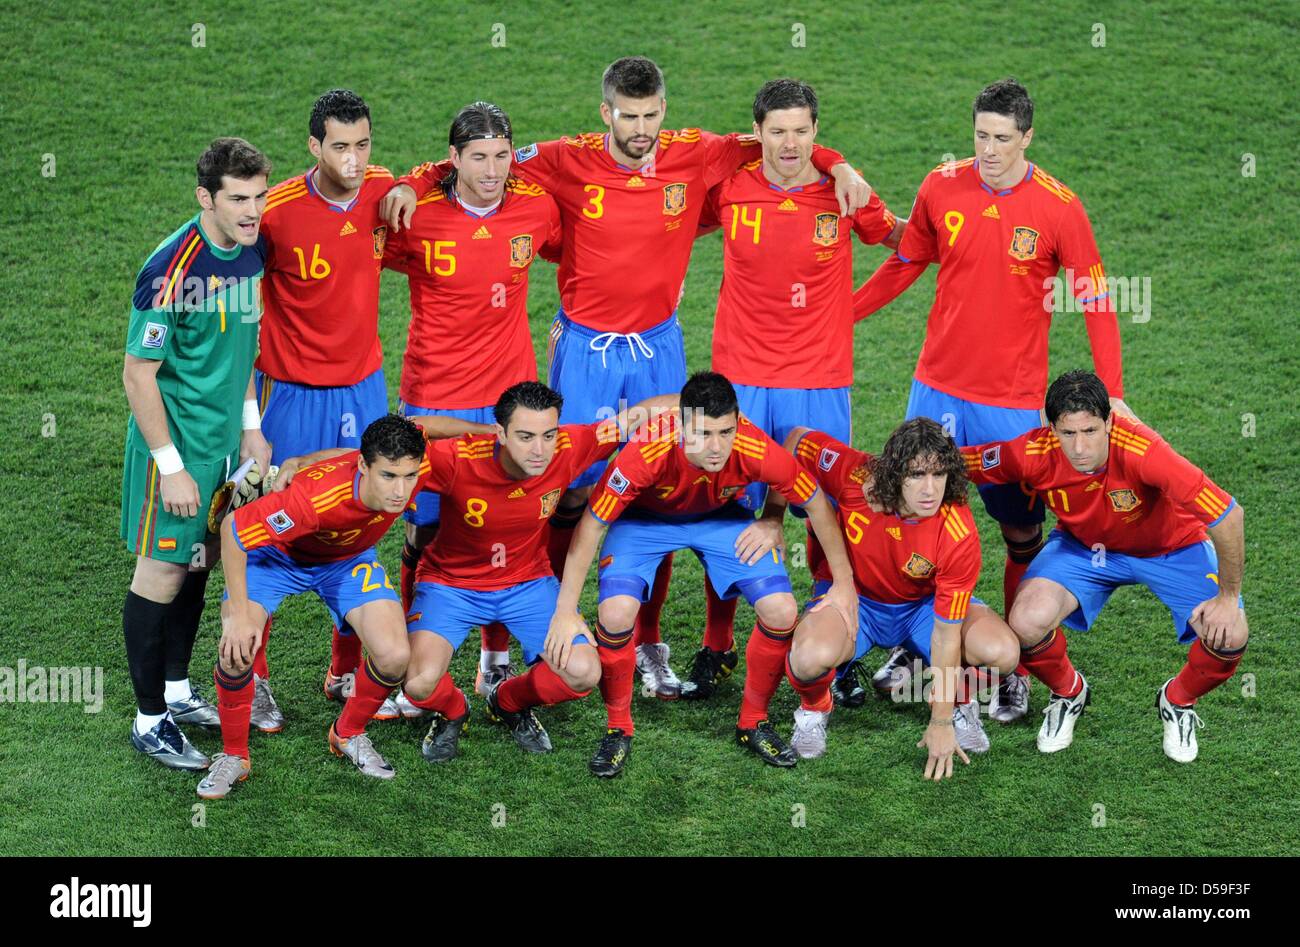 Iker Casillas (back row left to front row right) Sergio Busquets, Sergio Ramos ,Gerard Pique, Xabi Alonso, Fernando Torres, Jesus Navas, Xavi;David Villa, Carles Puyol and Joan Capdevila pose prior the FIFA World Cup 2010 group H match between Spain and Honduras at the Ellis Park Stadium in Johannesburg, South Africa 21 June 2010. Photo: Bernd Weissbrod dpa - Please refer to http:/ Stock Photo